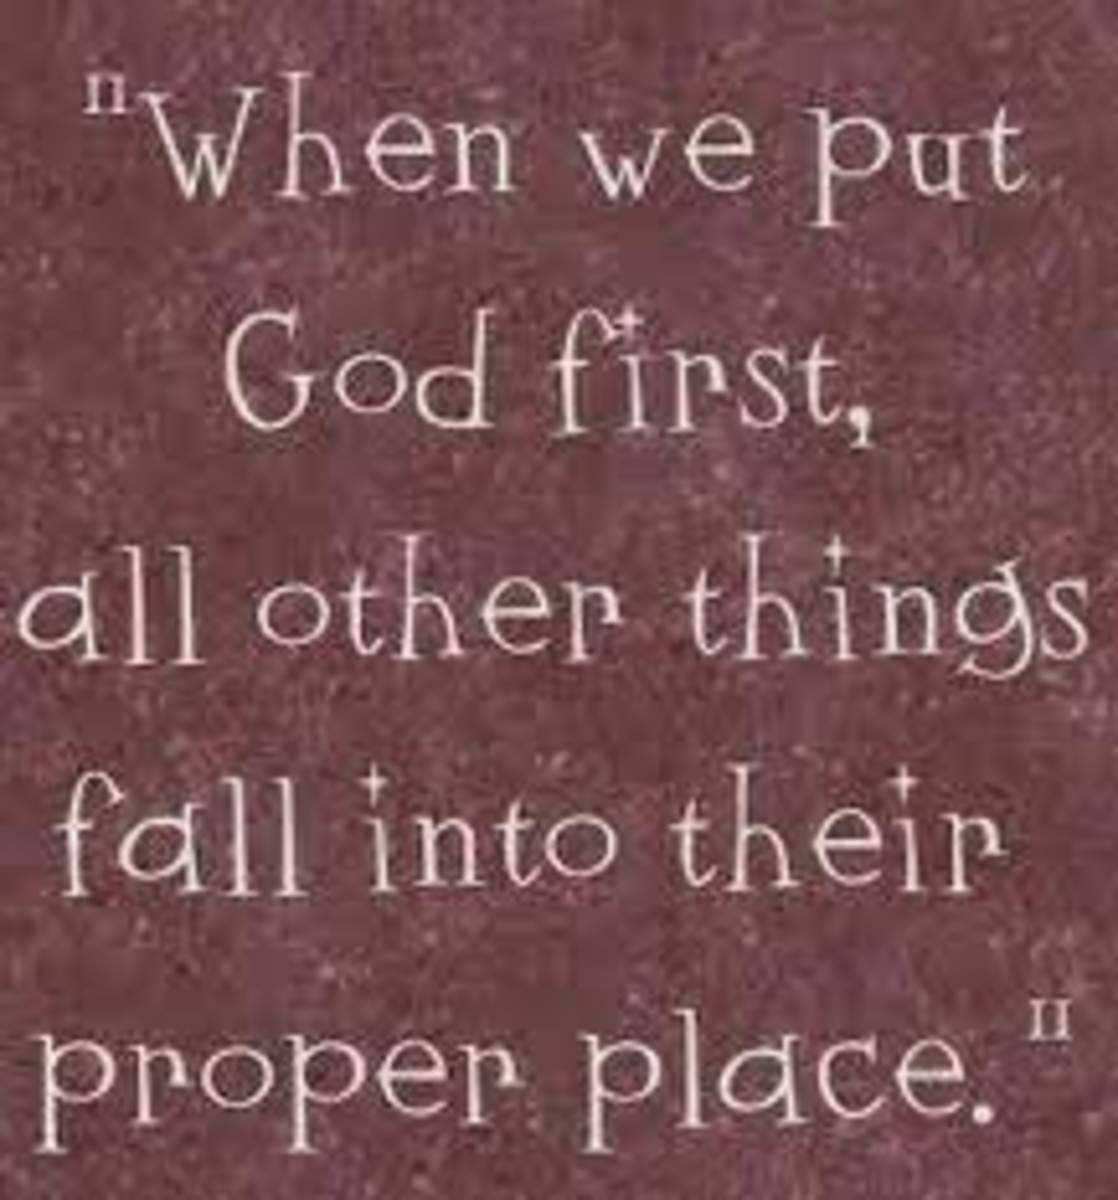 Putting God First and Foremost